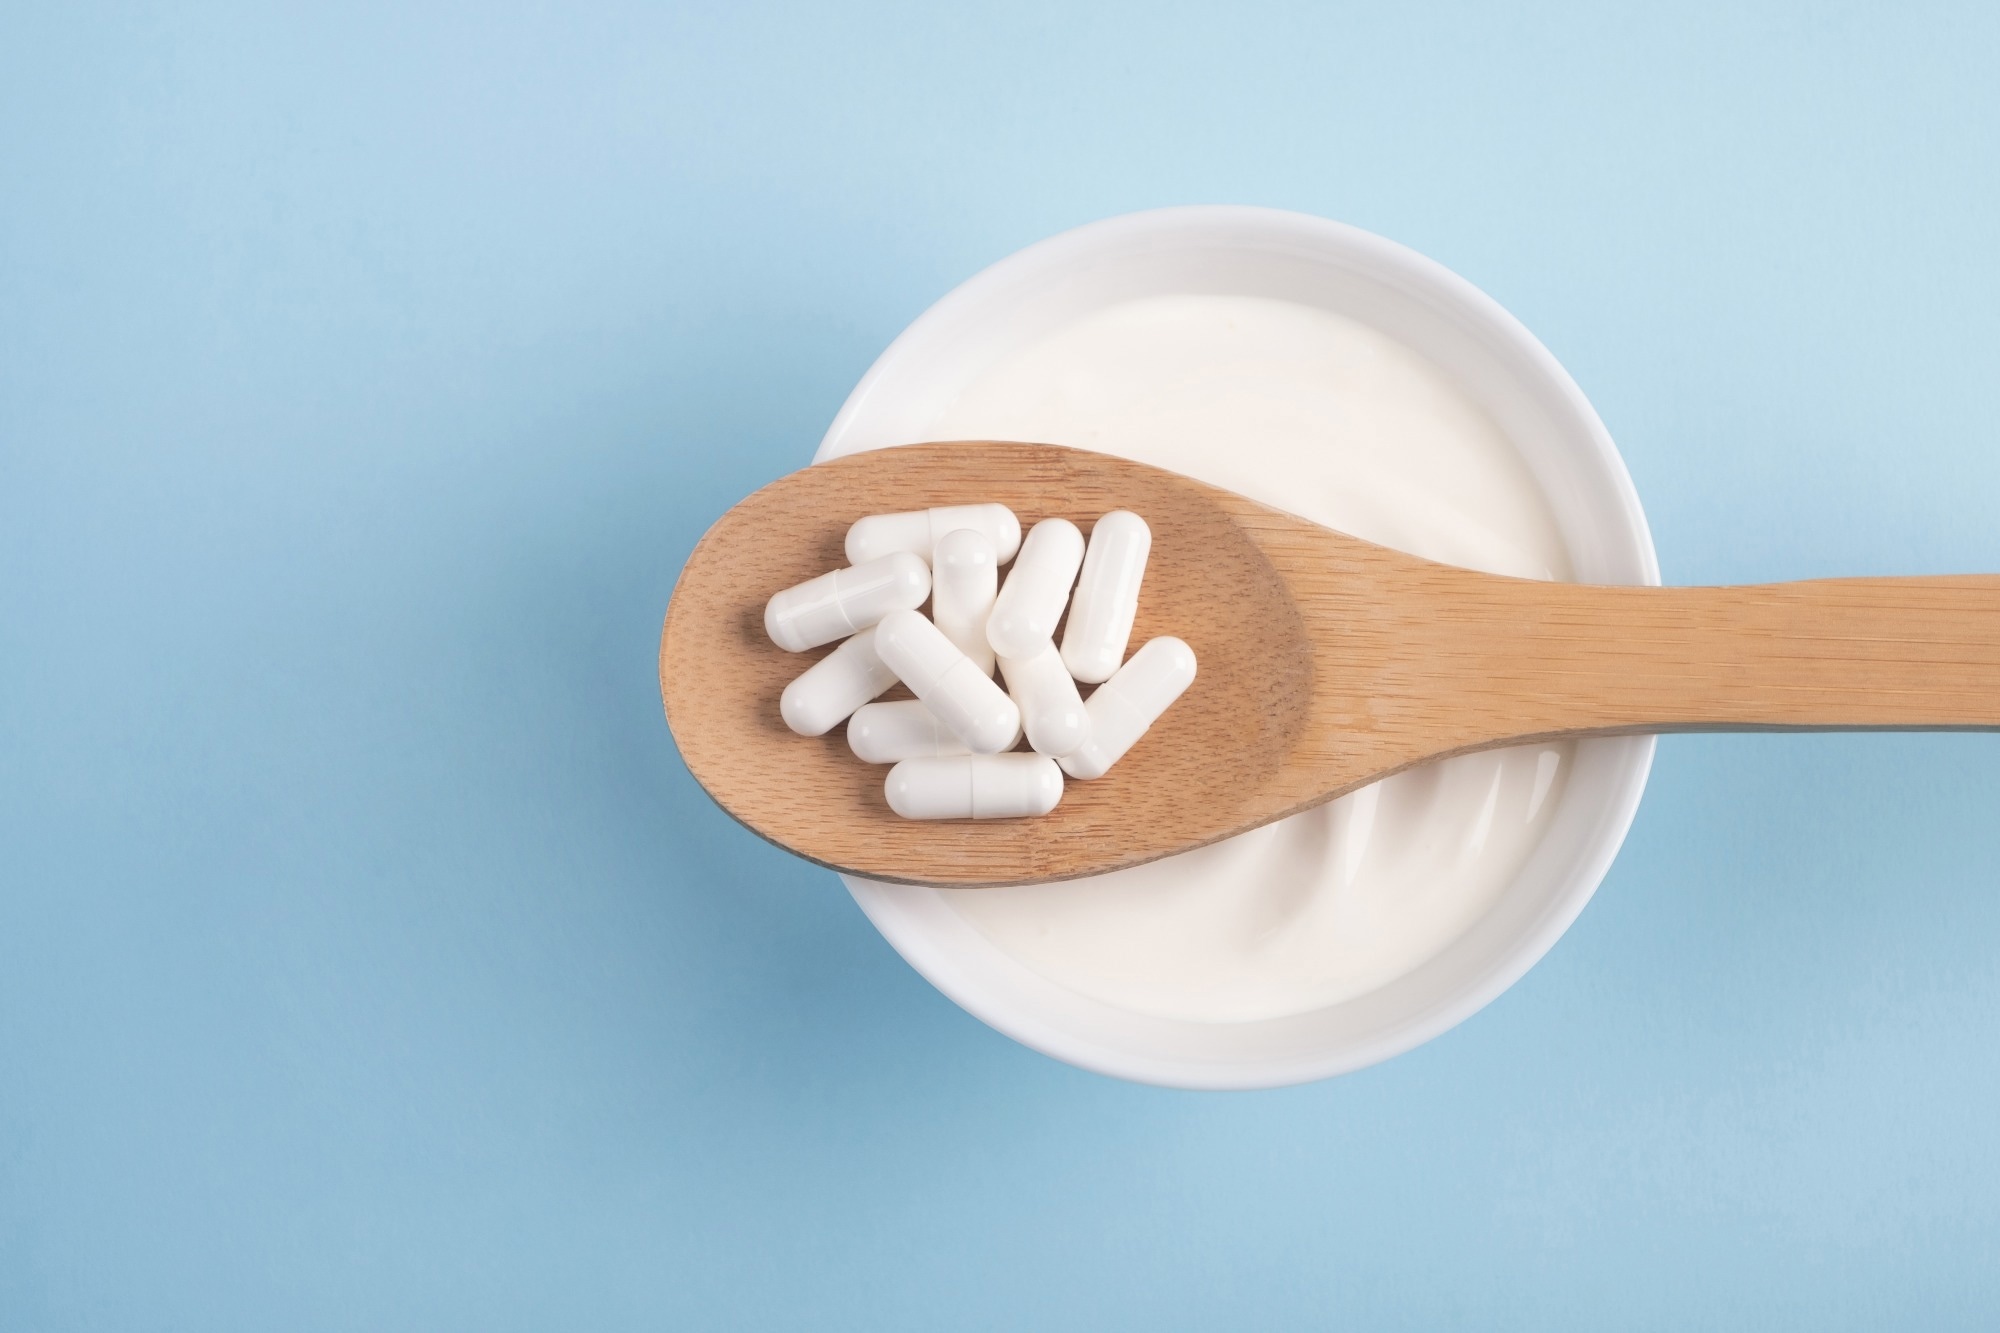 Study: Probiotics and Their Bioproducts: A Promising Approach for Targeting Methicillin-Resistant Staphylococcus aureus and Vancomycin-Resistant Enterococcus. Image Credit: Helena Nechaeva/Shutterstock.com